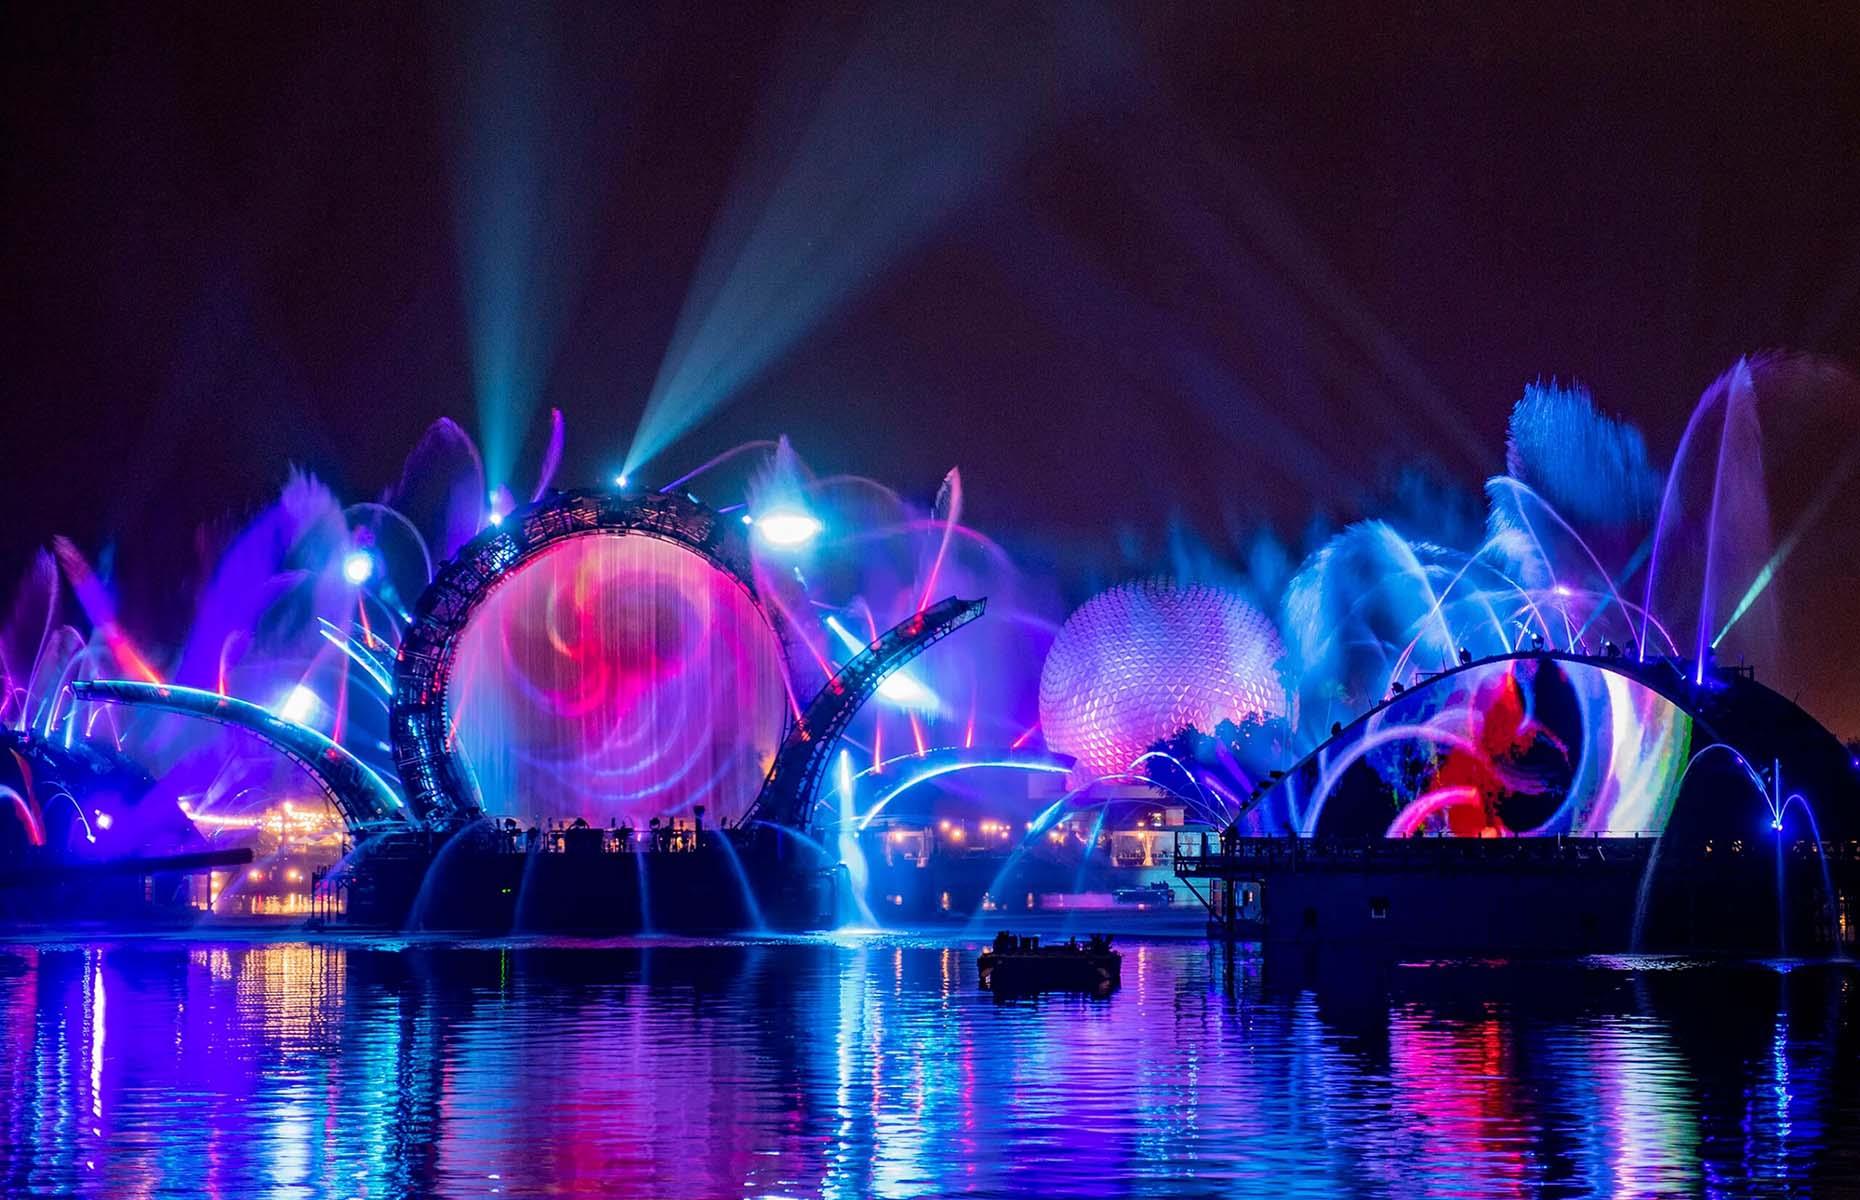 Among the new shows launching is Harmonius at EPCOT. One of the largest nighttime spectacles ever created at Disney, it'll celebrate the music of Disney and how it inspires people. The scores will be performed by a diverse group of artists from around the world, while the setting for the show will feature massive floating set pieces, custom-built LED panels and choreography including moving fountains, lights, lasers and pyrotechnics.